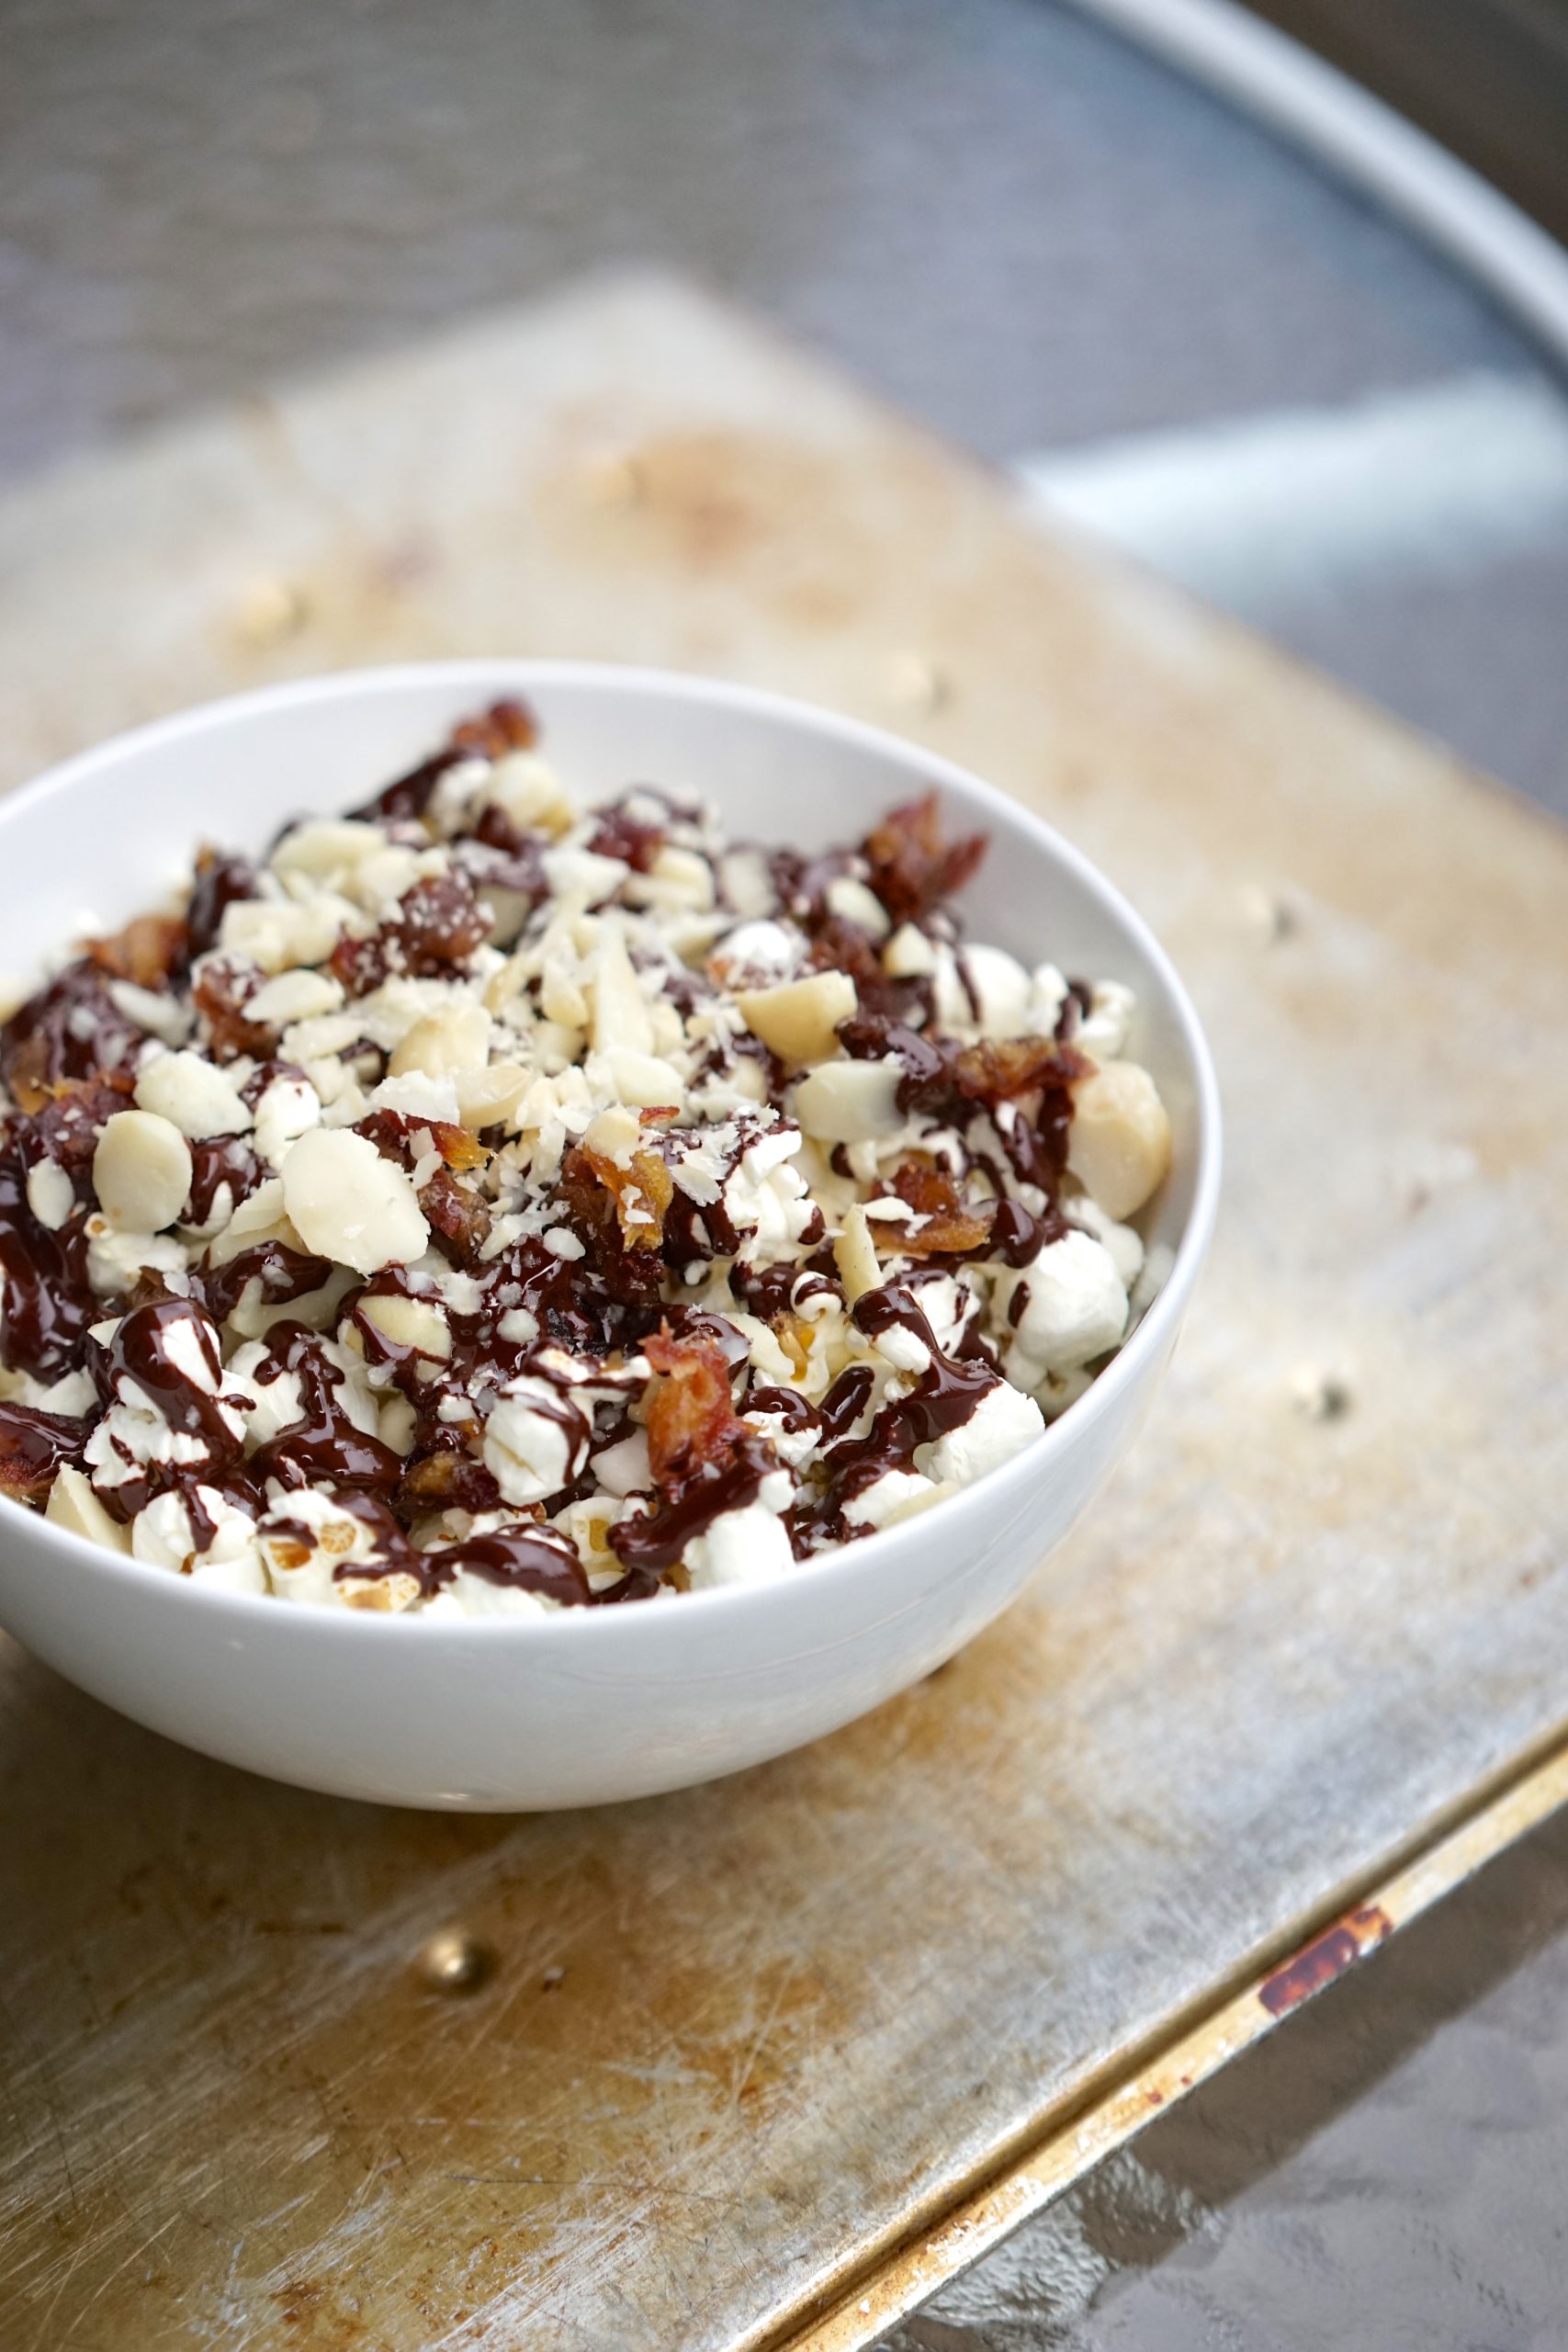 Olive Oil Popcorn with Dark Chocolate, Macadamia Nuts & Dates | Living Healthy in Seattle